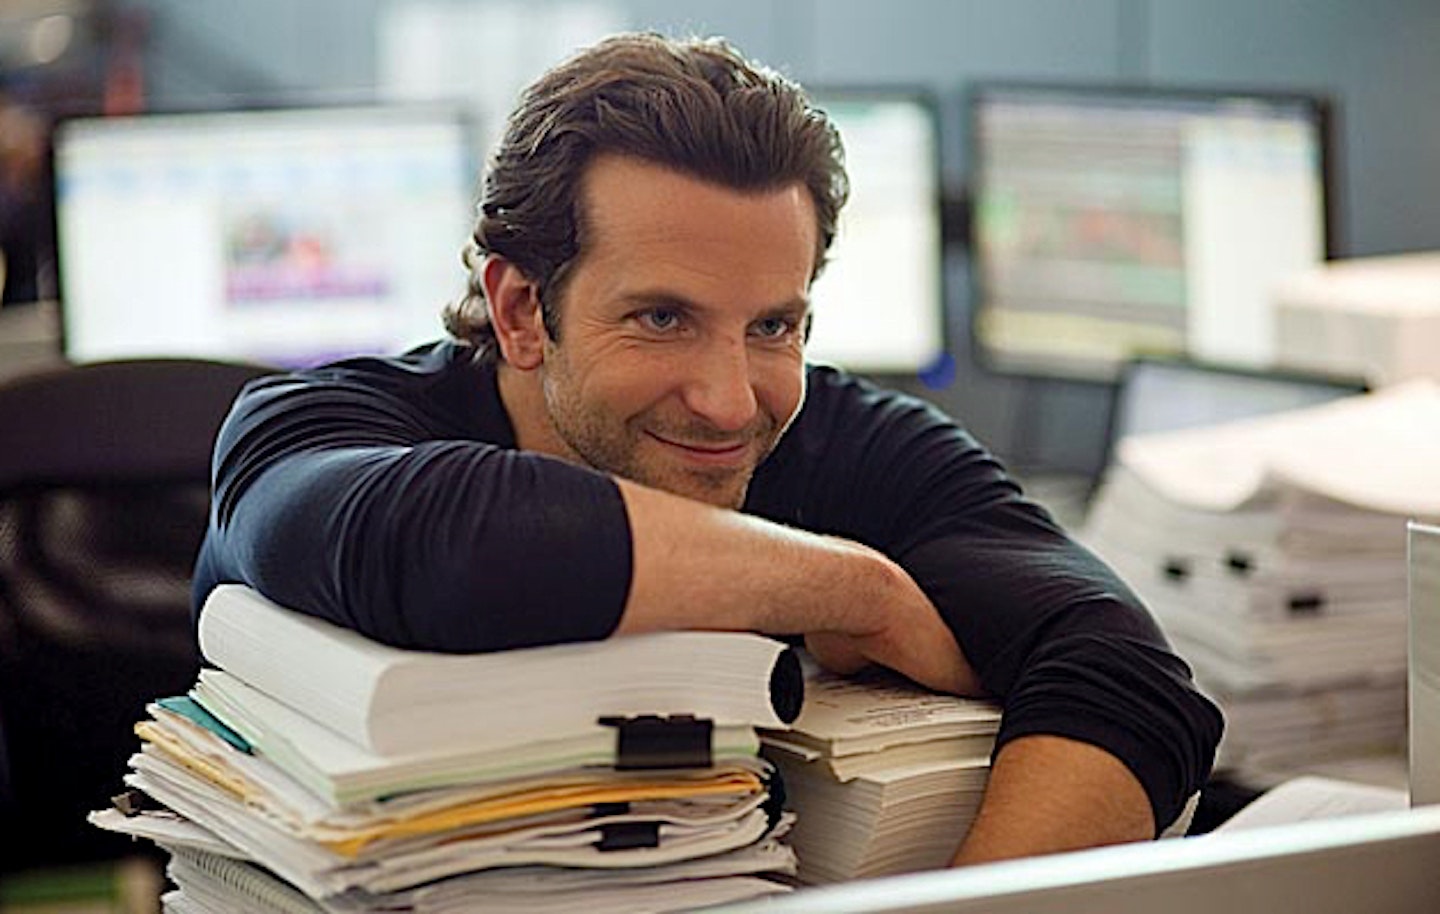 Bradley Cooper Is Going to Be in the New 'Limitless' TV Show - RELEVANT